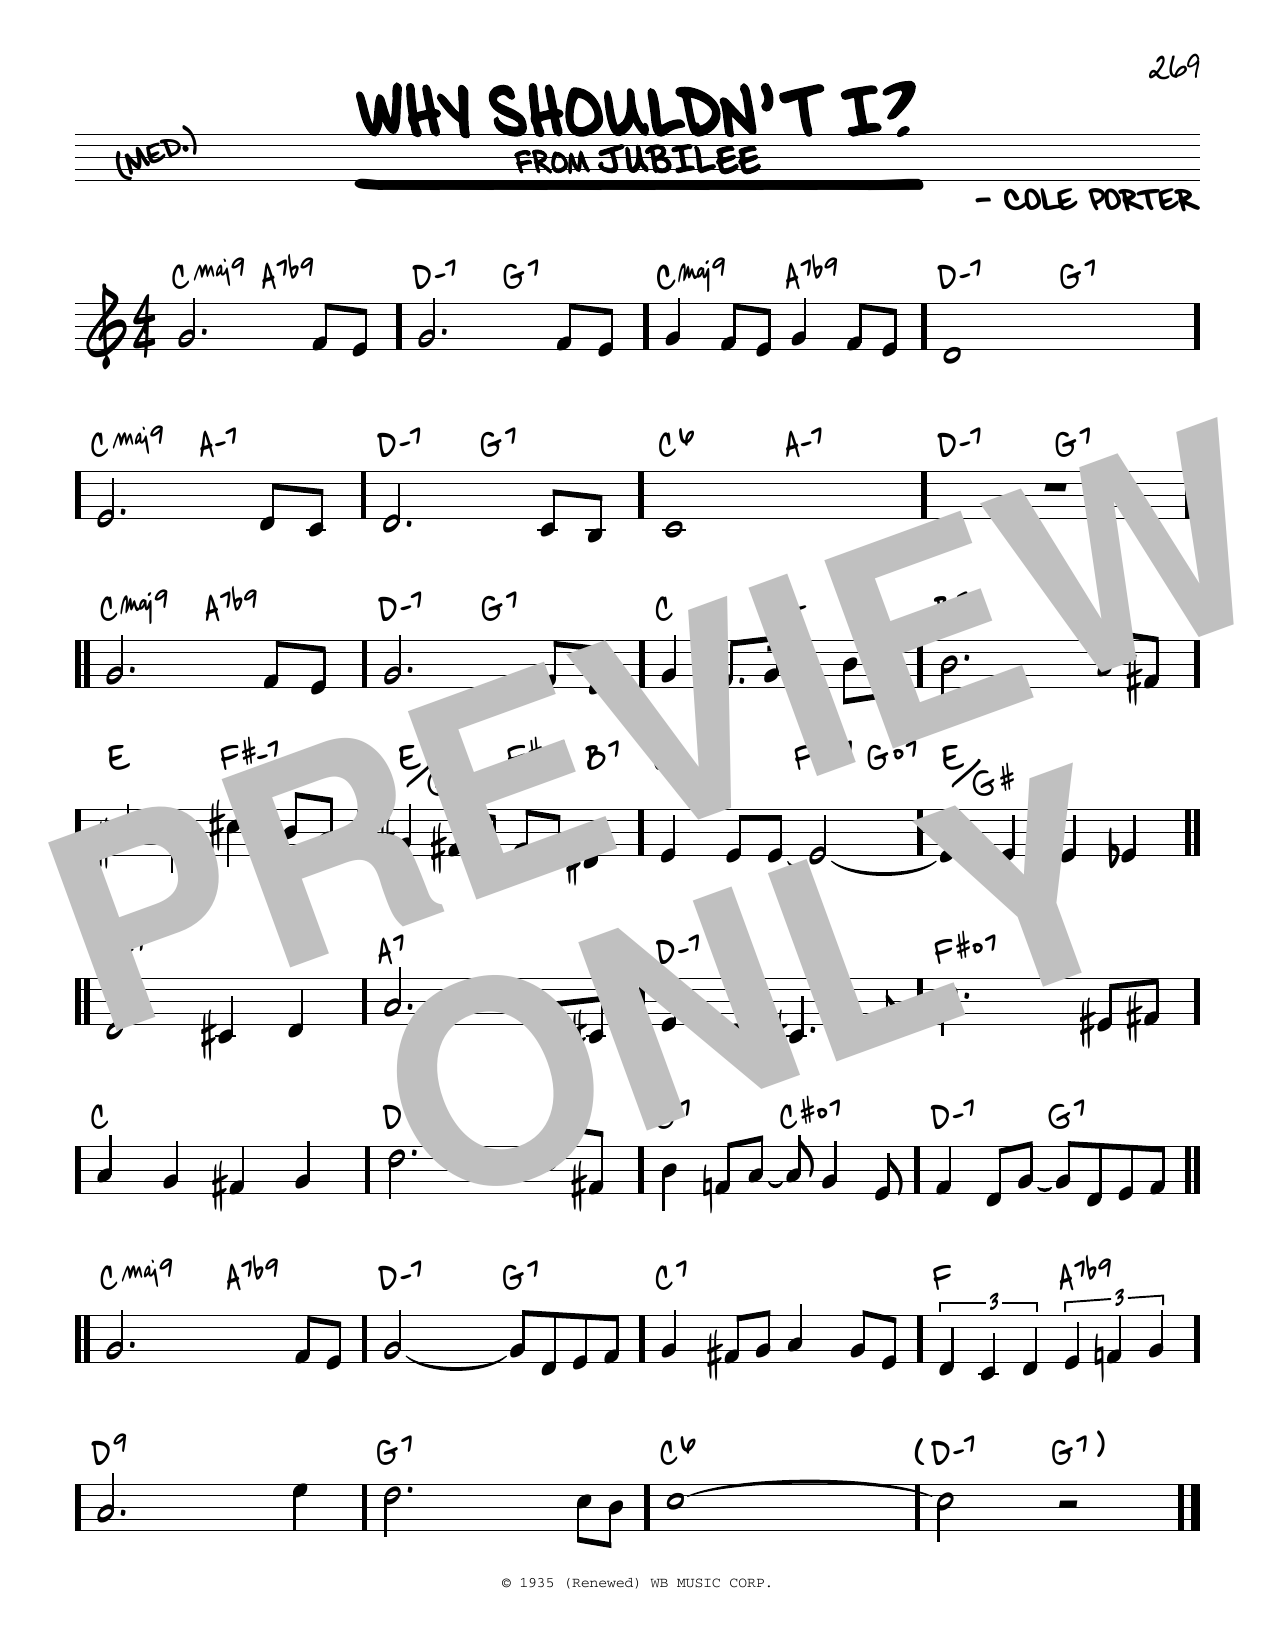 Download Cole Porter Why Shouldn't I? Sheet Music